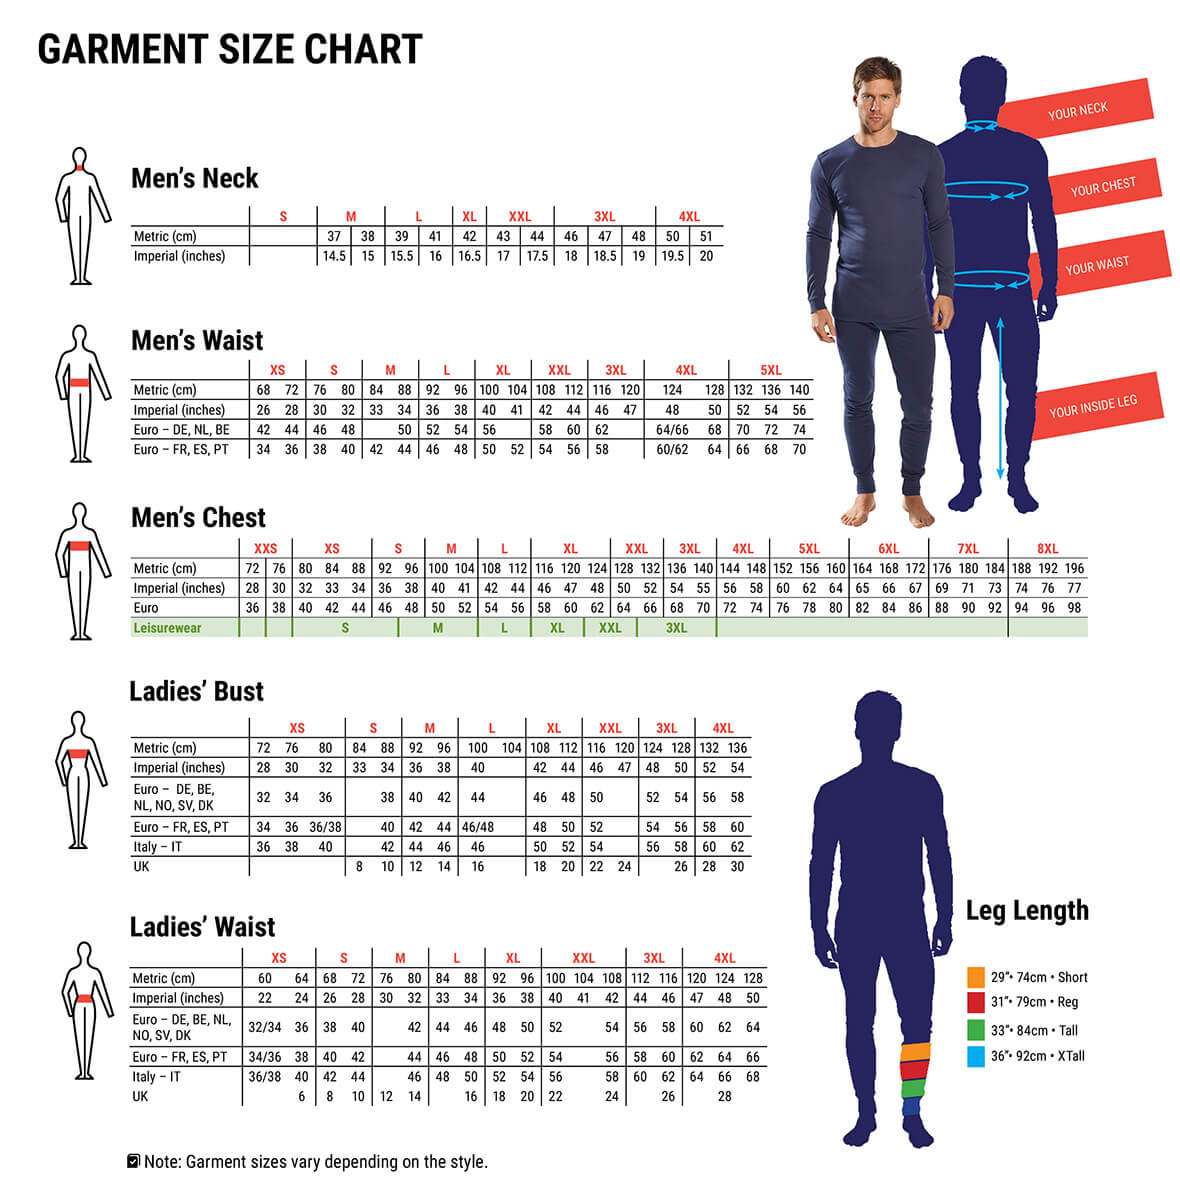 Australian Clothing Size Conversion Charts for Men  Man of Many